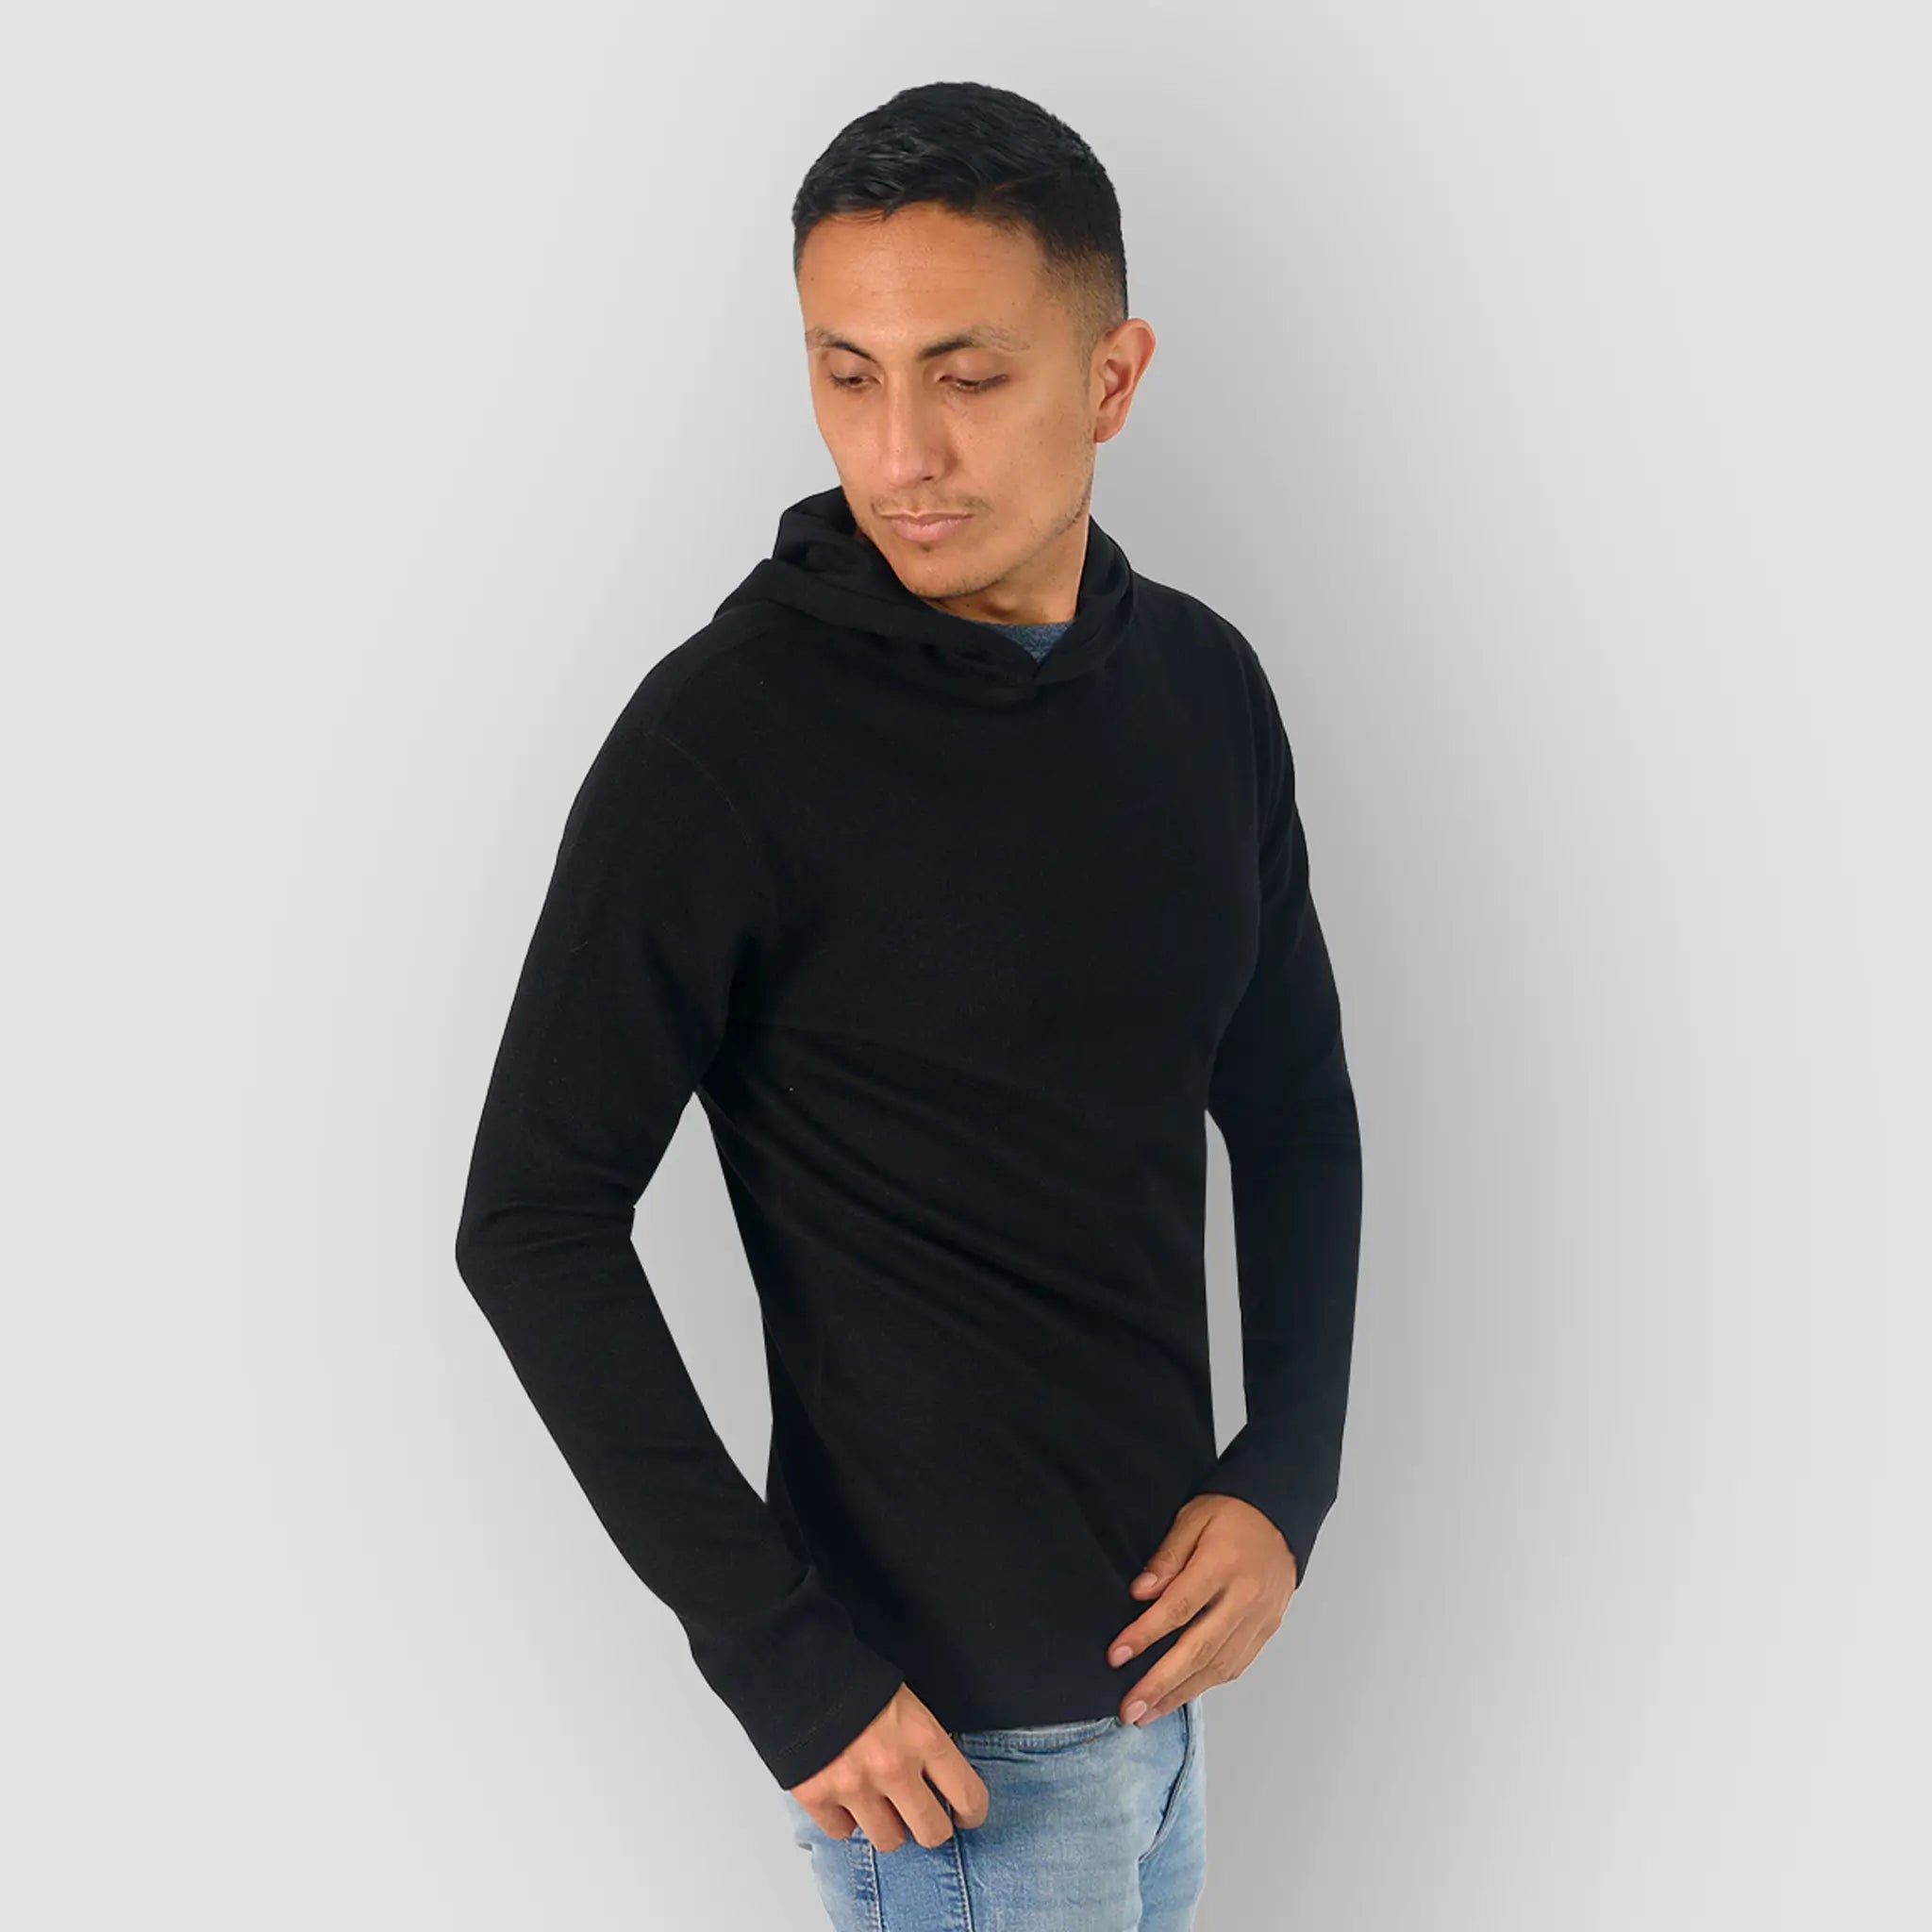 Men's Alpaca Wool Base Layers & THERMALS for Outdoor Sports – Arms of Andes